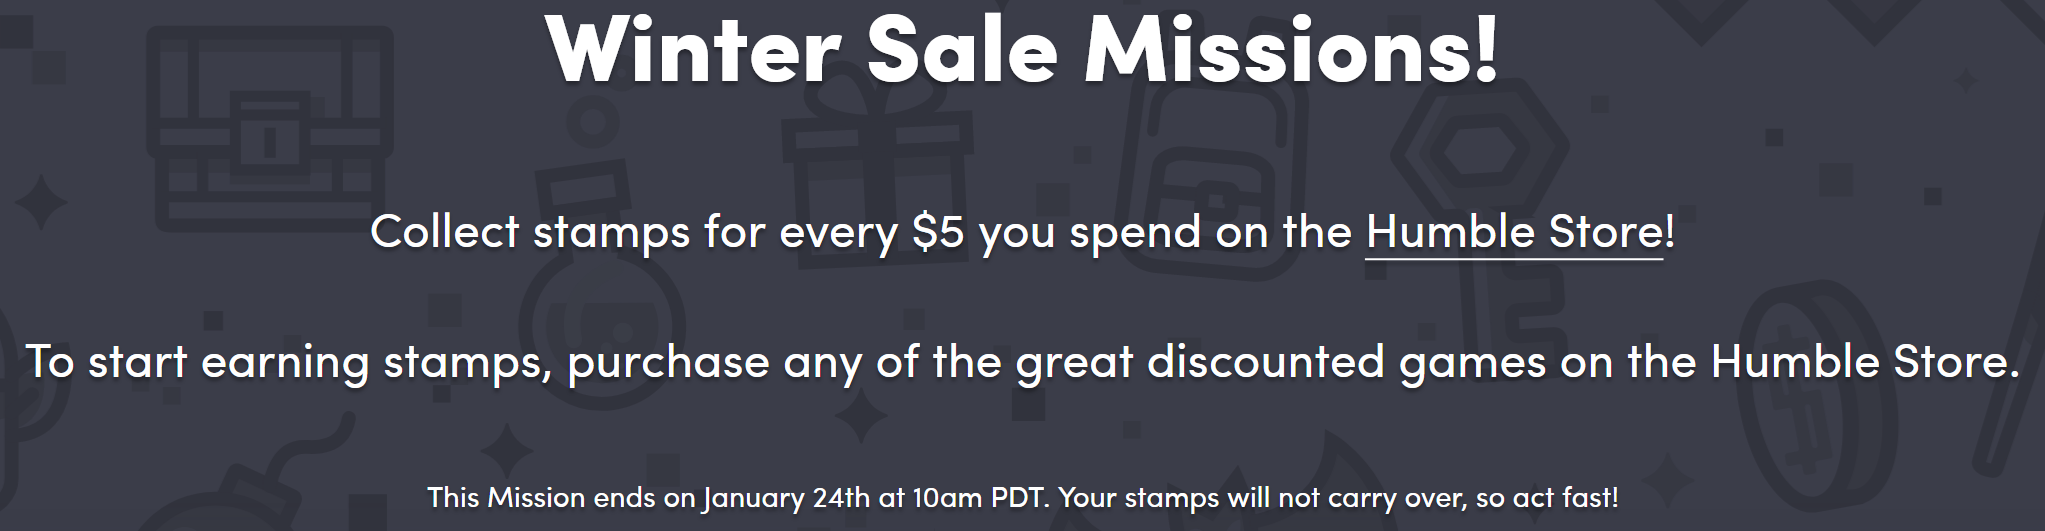 Screenshot_2019-01-11 Mission - Winter Sale Missions.png